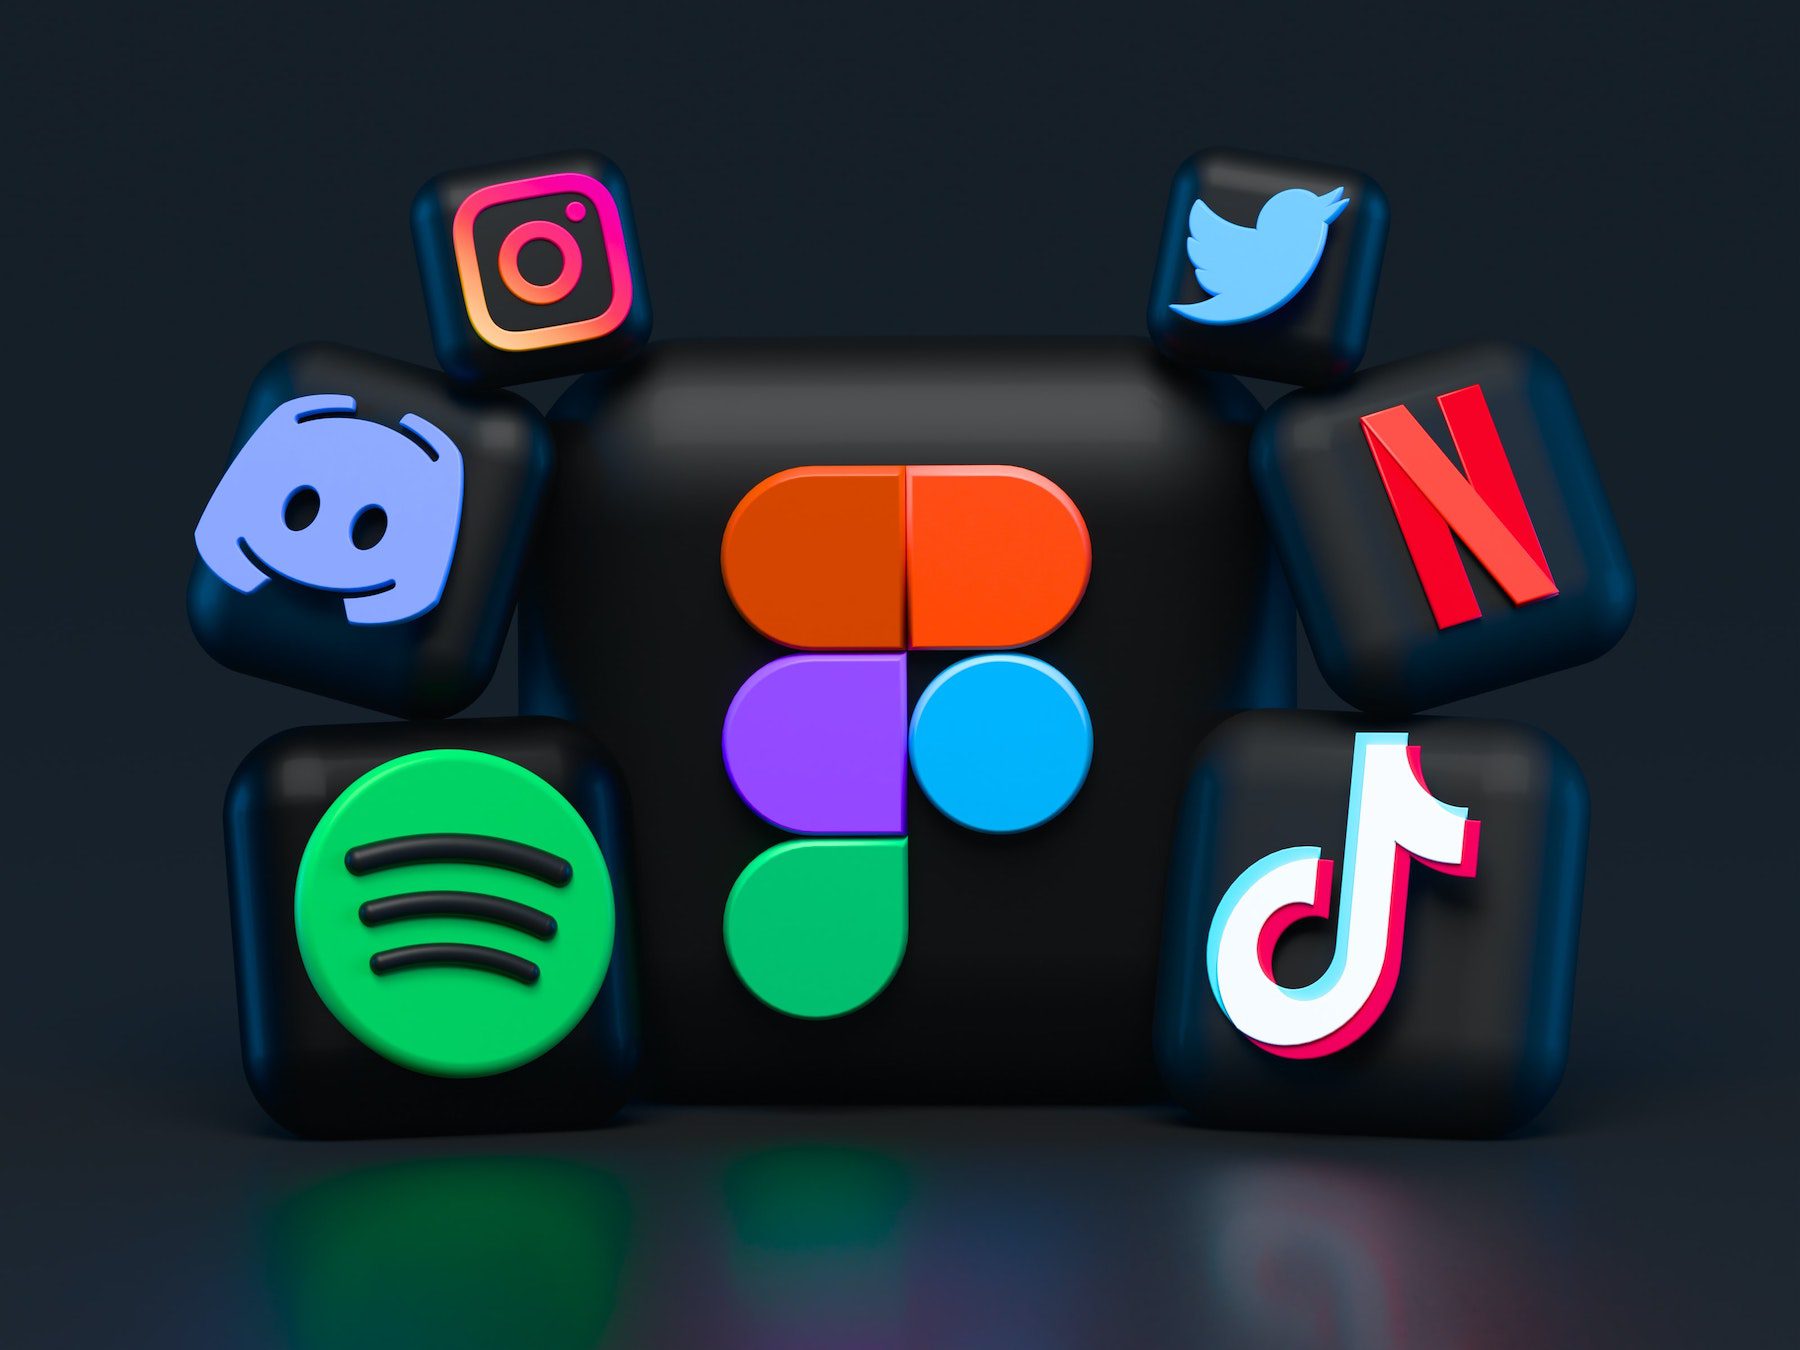 Social media icons glowing neon colors on a black background.